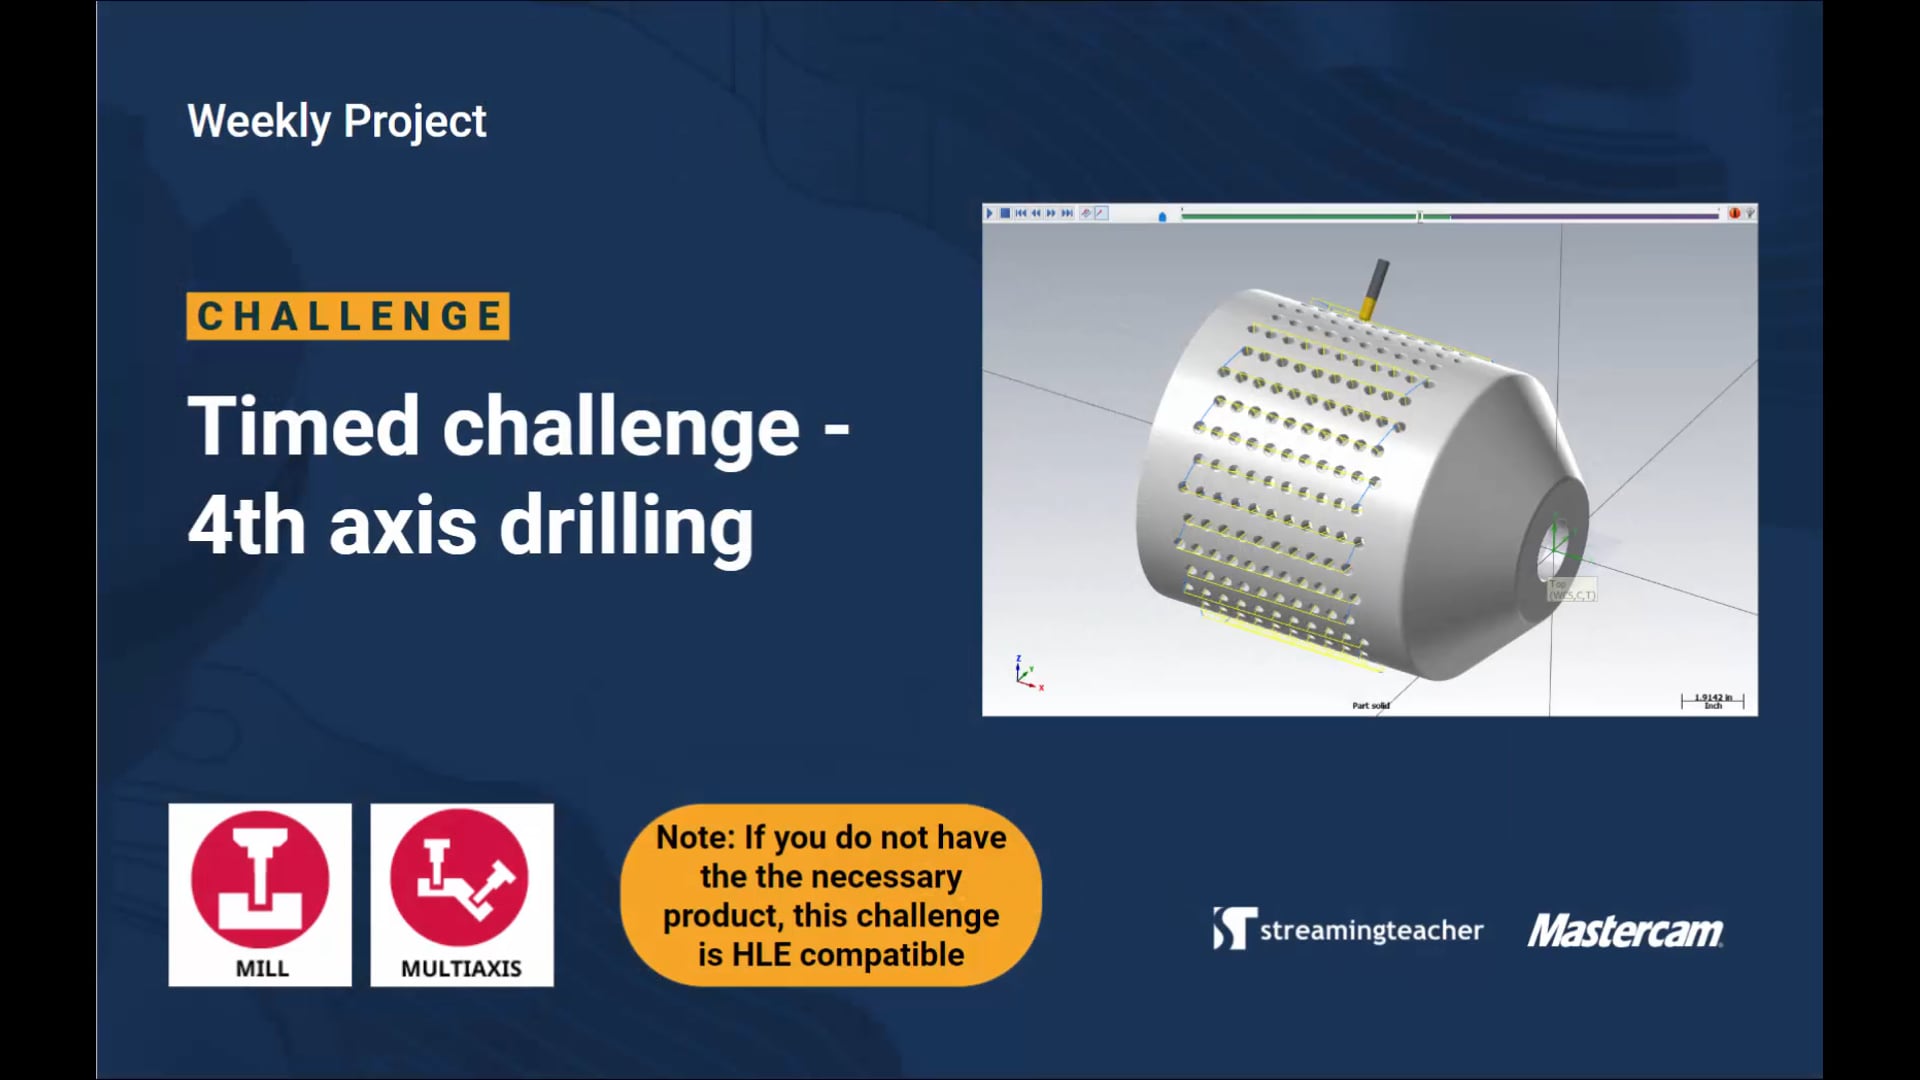 Timed challenge - 4th axis drilling